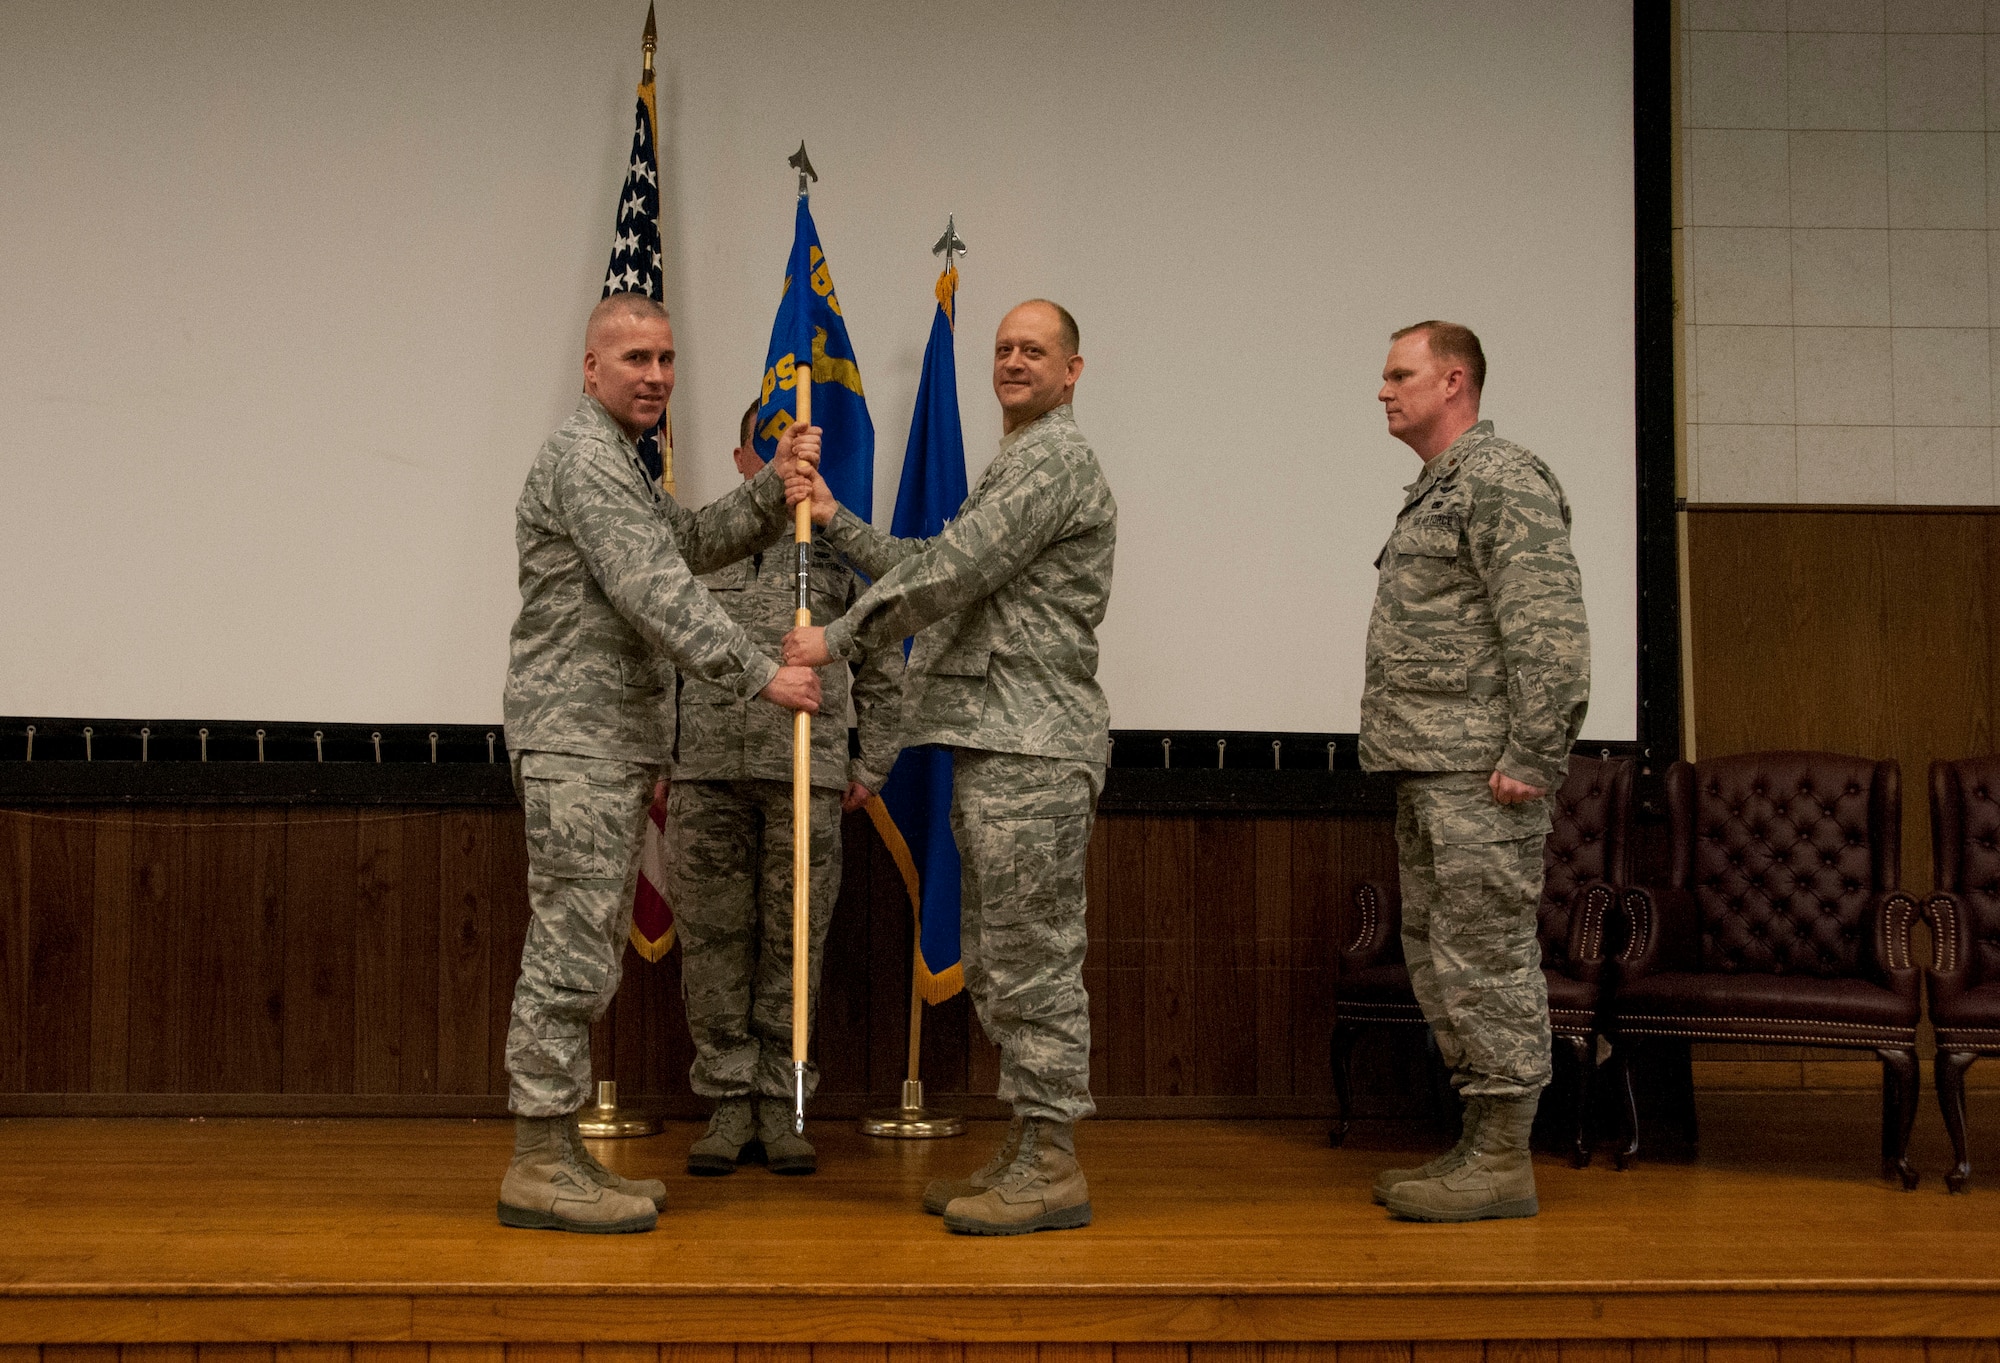 Colonel Randy Stoeckmann, commander of the 459th Mission Support Group, Joint Base Andrews, Maryland, hands Maj. Justin O’Brien, commander of the 69th Aerial Port Squadron, the 69th APS guidon at a change of command ceremony March 5, 2016. Major Robert Hamilton relinquished command to O’Brien, who is returning to the 69th APS after having served with the squadron twice before as an enlisted Airman and a company grade officer. (U.S. Air Force photo/Staff Sgt. Tiffany Lindemann)